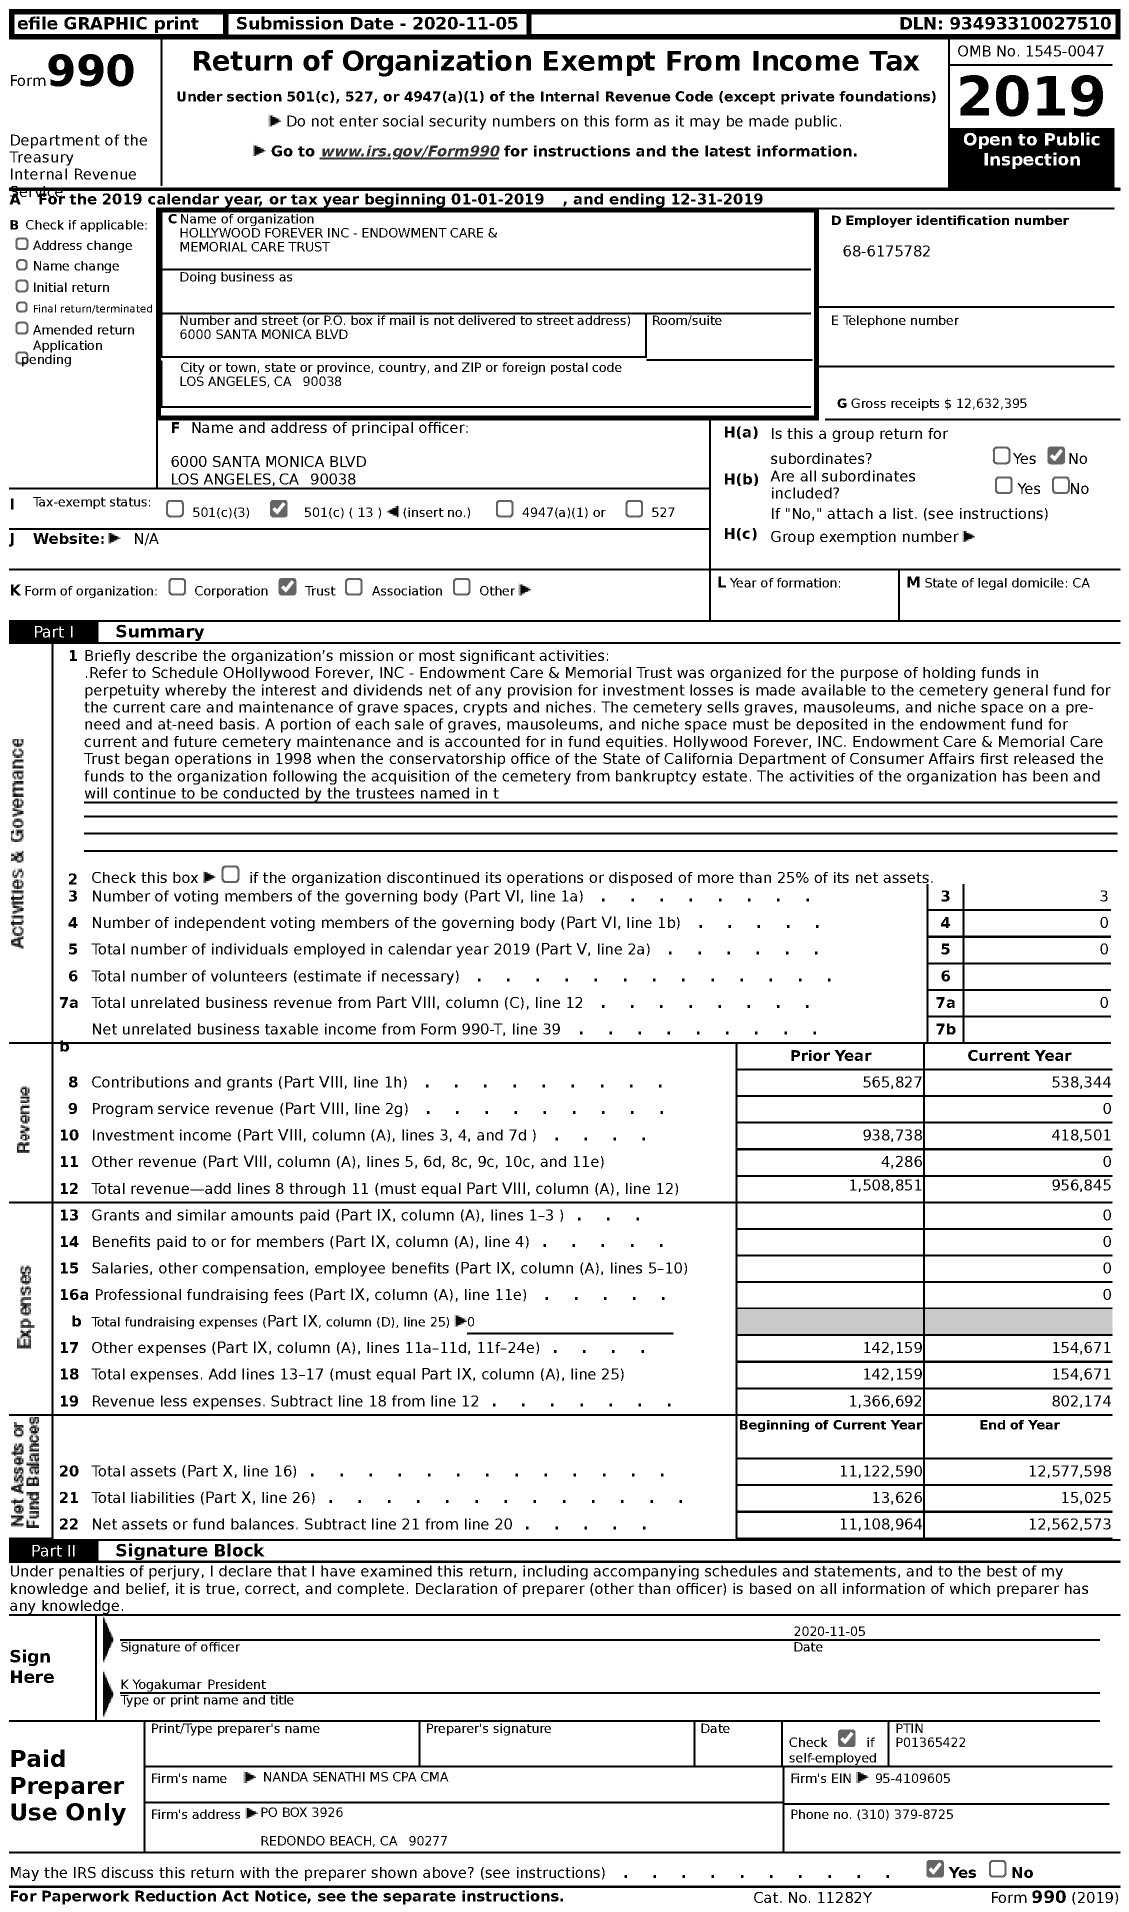 Image of first page of 2019 Form 990 for Hollywood Forever - Endowment Care and Memorial Care Trust